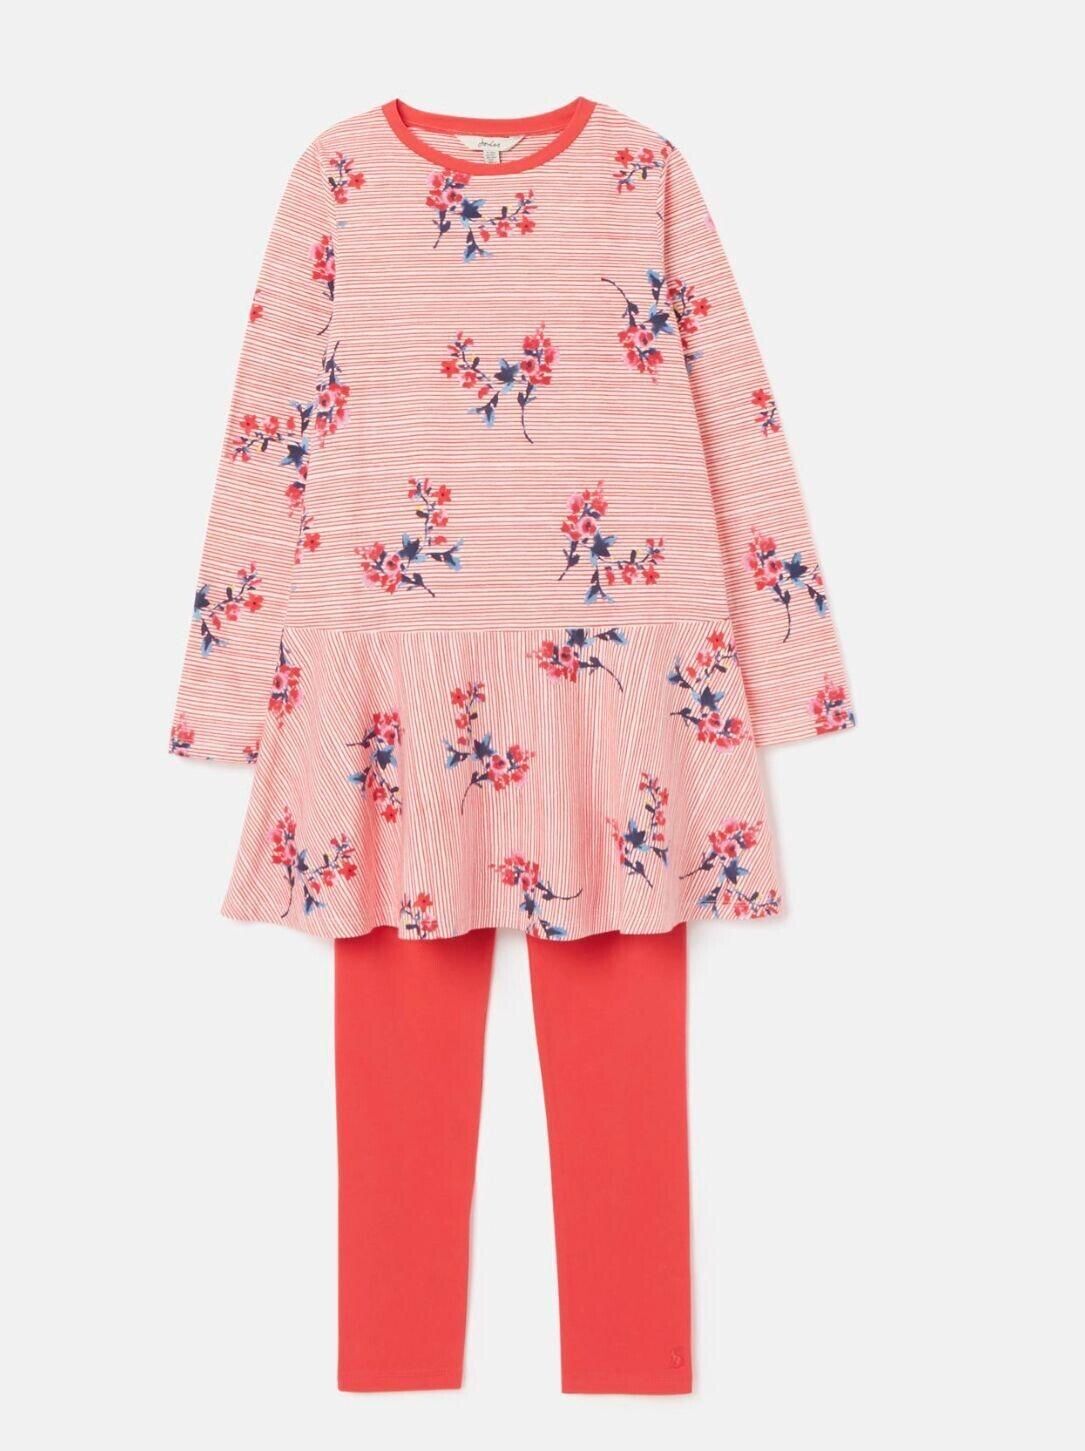 Joules Girls Long Sleeve Dress And Leggings Set Floralst Ages 1-10 Years